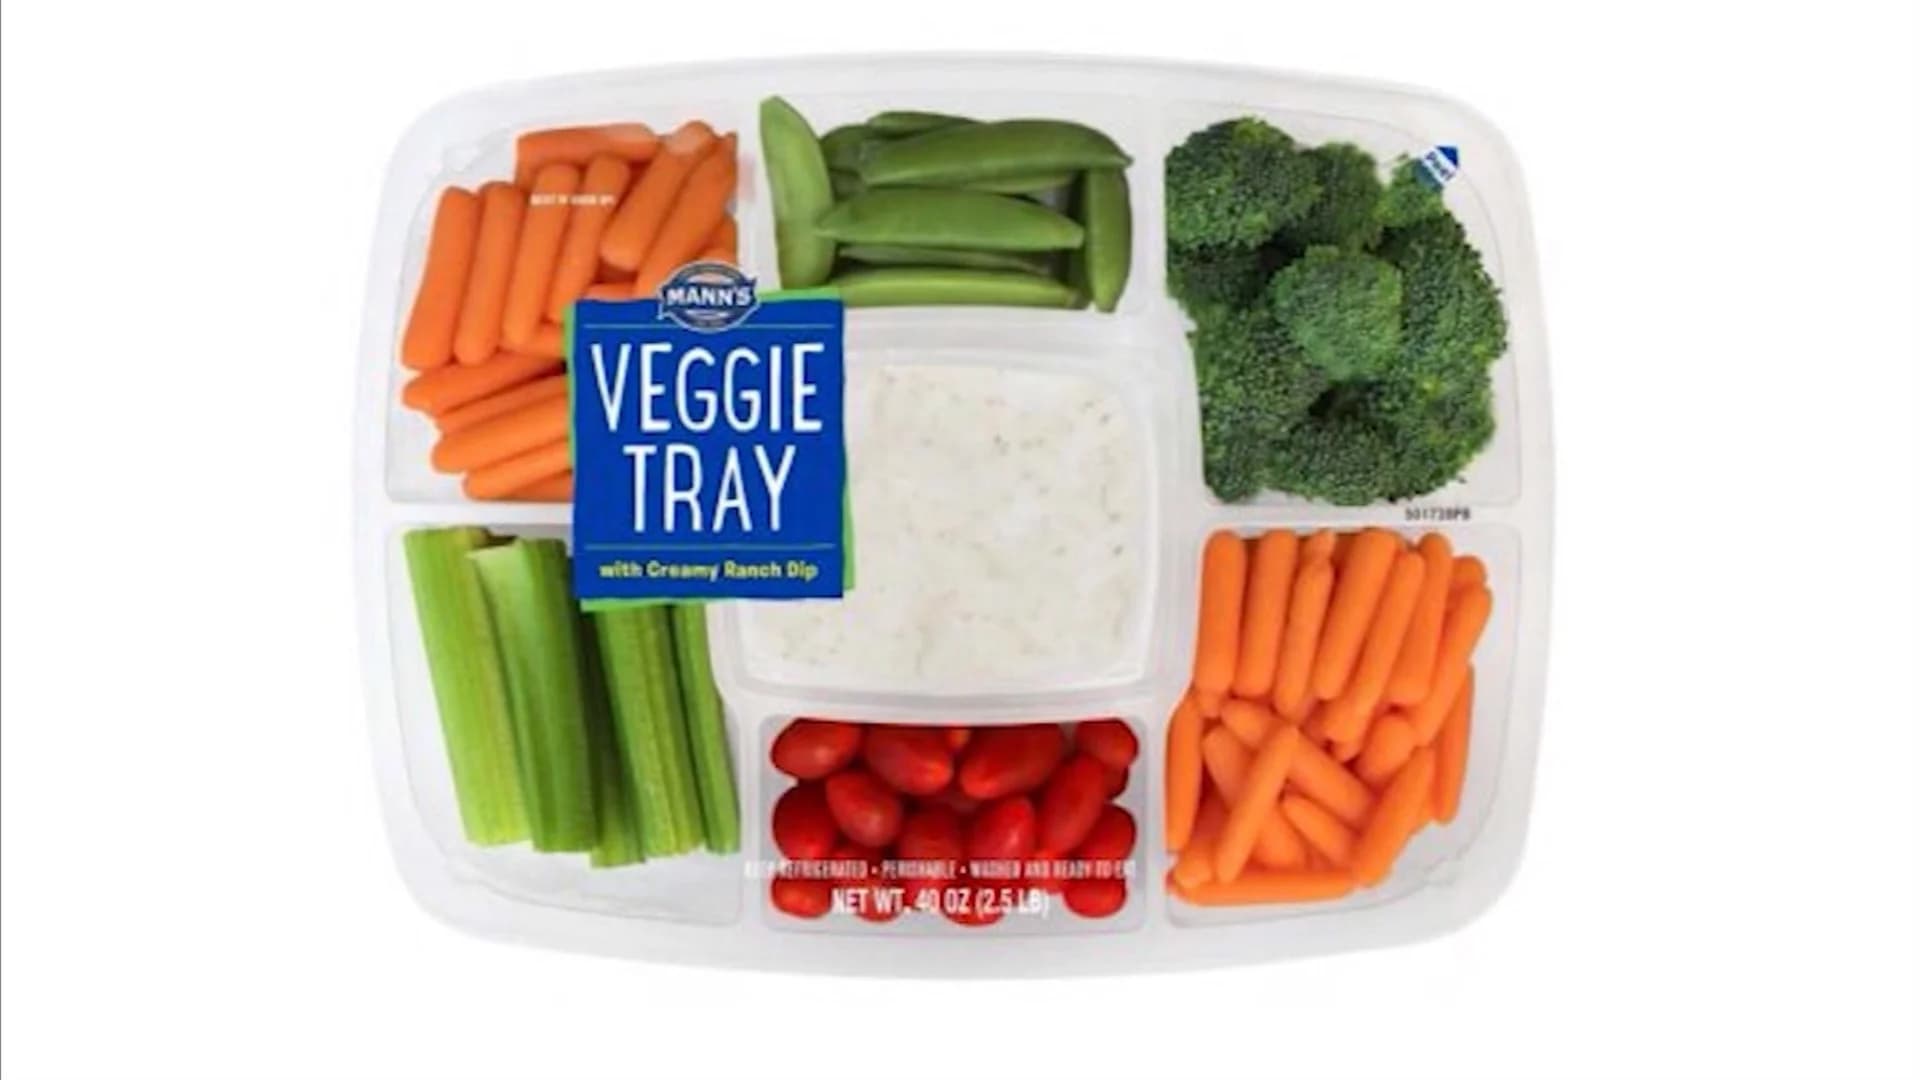 More than 100 vegetable products recalled over listeria concerns